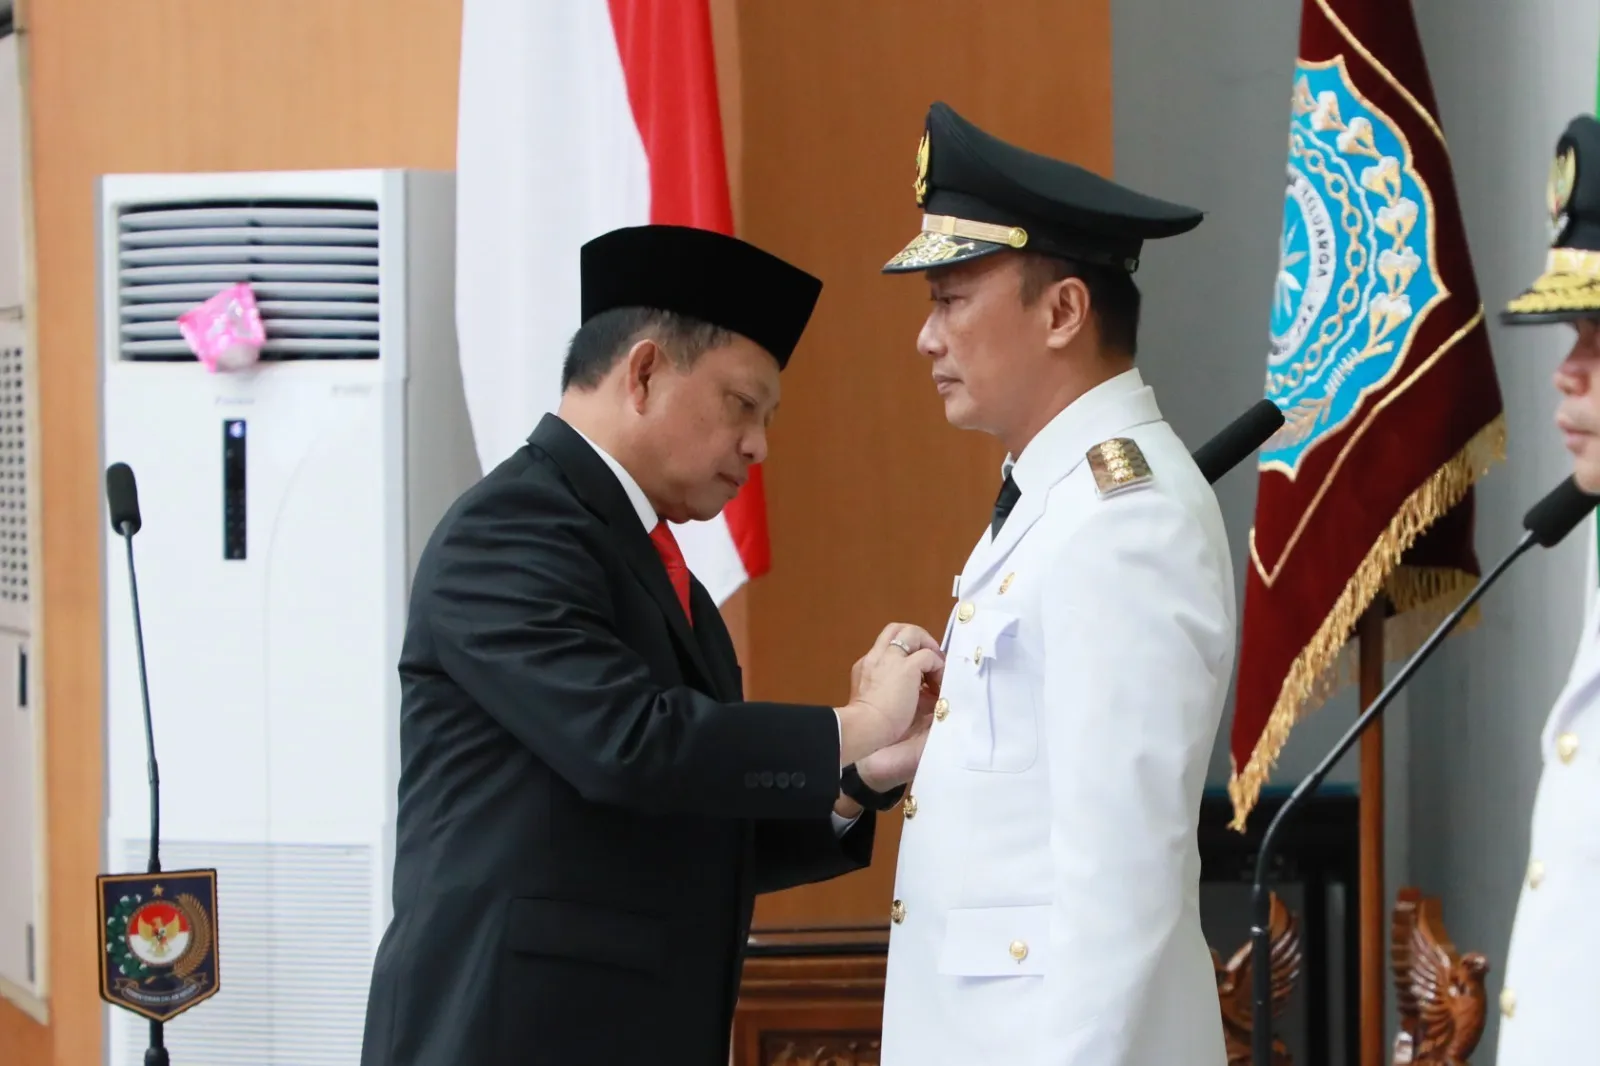 UNS Alumnus Appointed as Interim West Sulawesi Governor